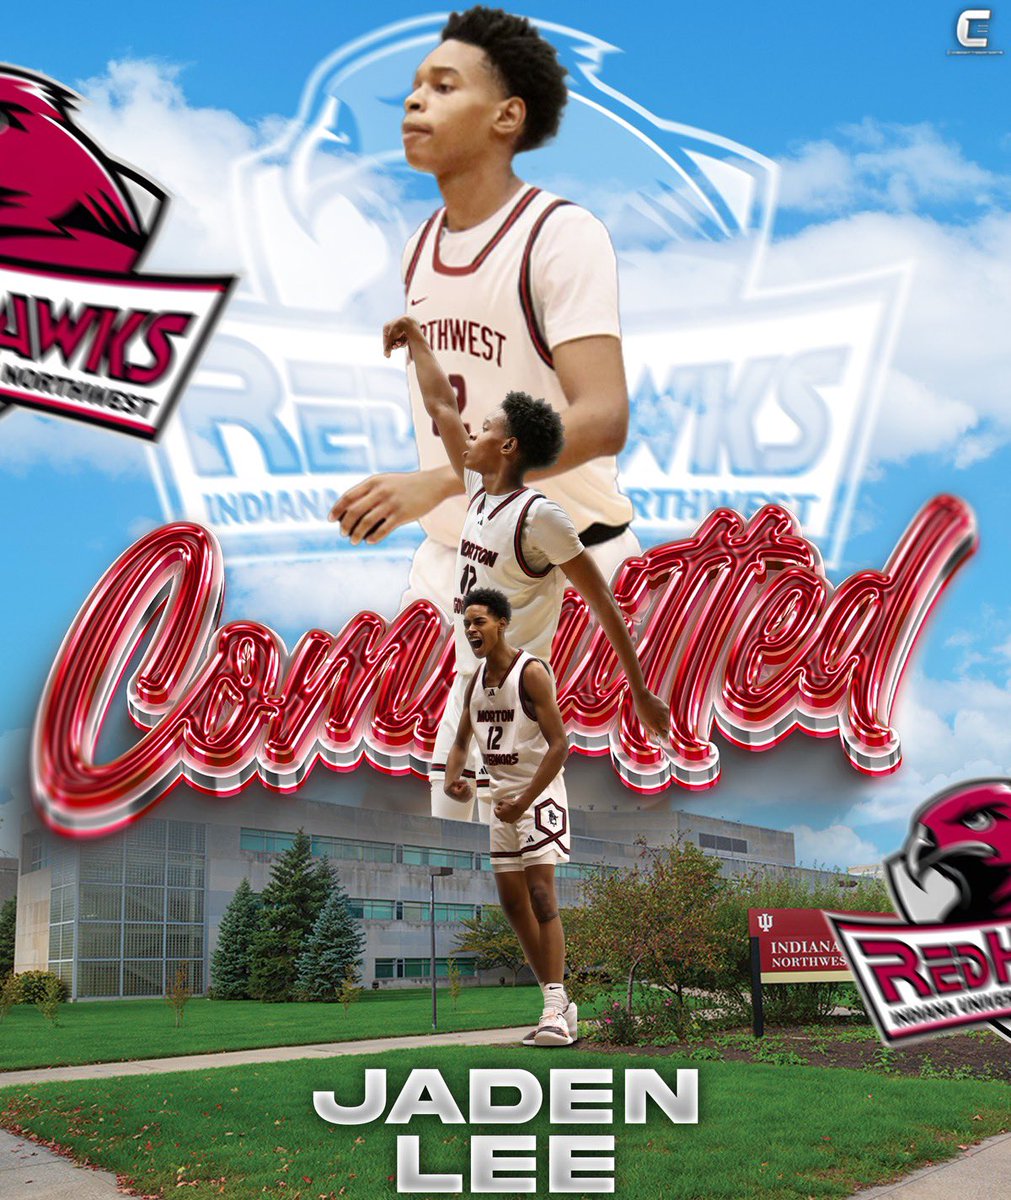 Join us in the cafeteria today after school to celebrate Jaden and Willie signing to continue their academic and athletic careers together next year at IUN! 🎩🏀 Let’s #GoGovs @JadenLee1124 @willcollins_0 @Morton_Hoops @IUN_MensBBall @SCHK12 @MortonHighGovs